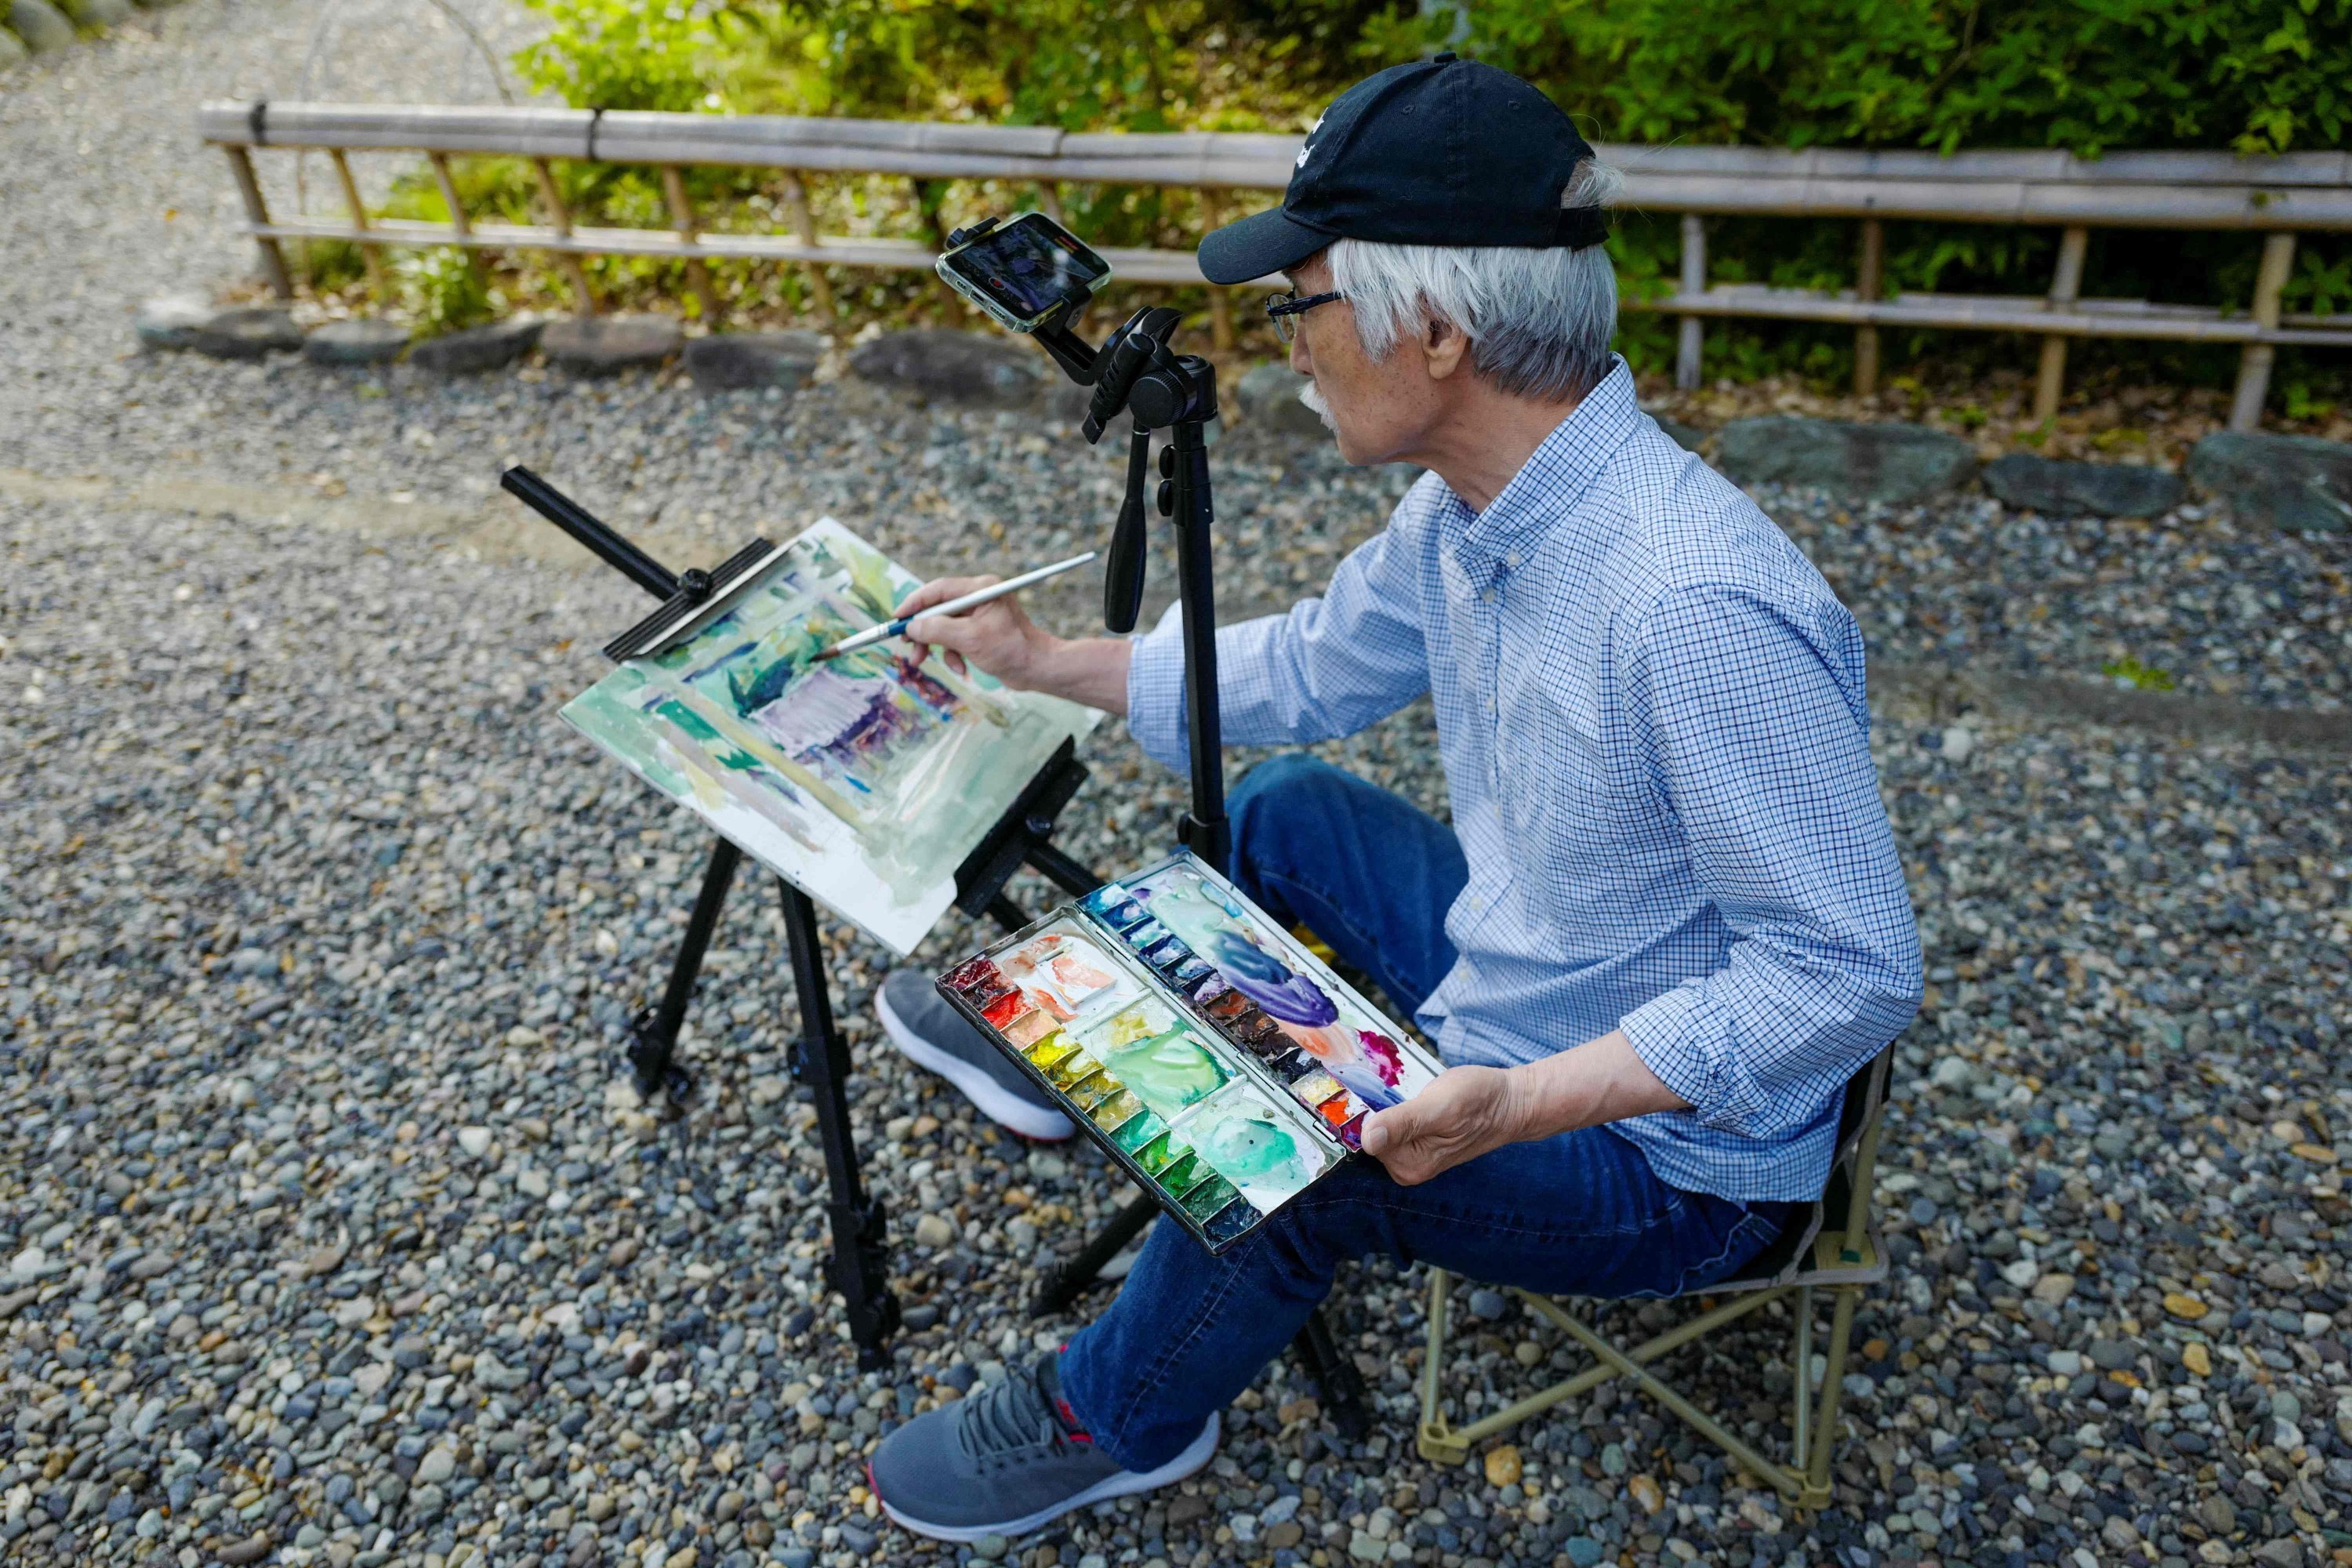 Japanese art instructor Harumichi Shibasaki paints with watercolors while recording video footage using his phone at a shrine in Isumi, Chiba prefecture, Japan, May 25, 2022. (AFP)